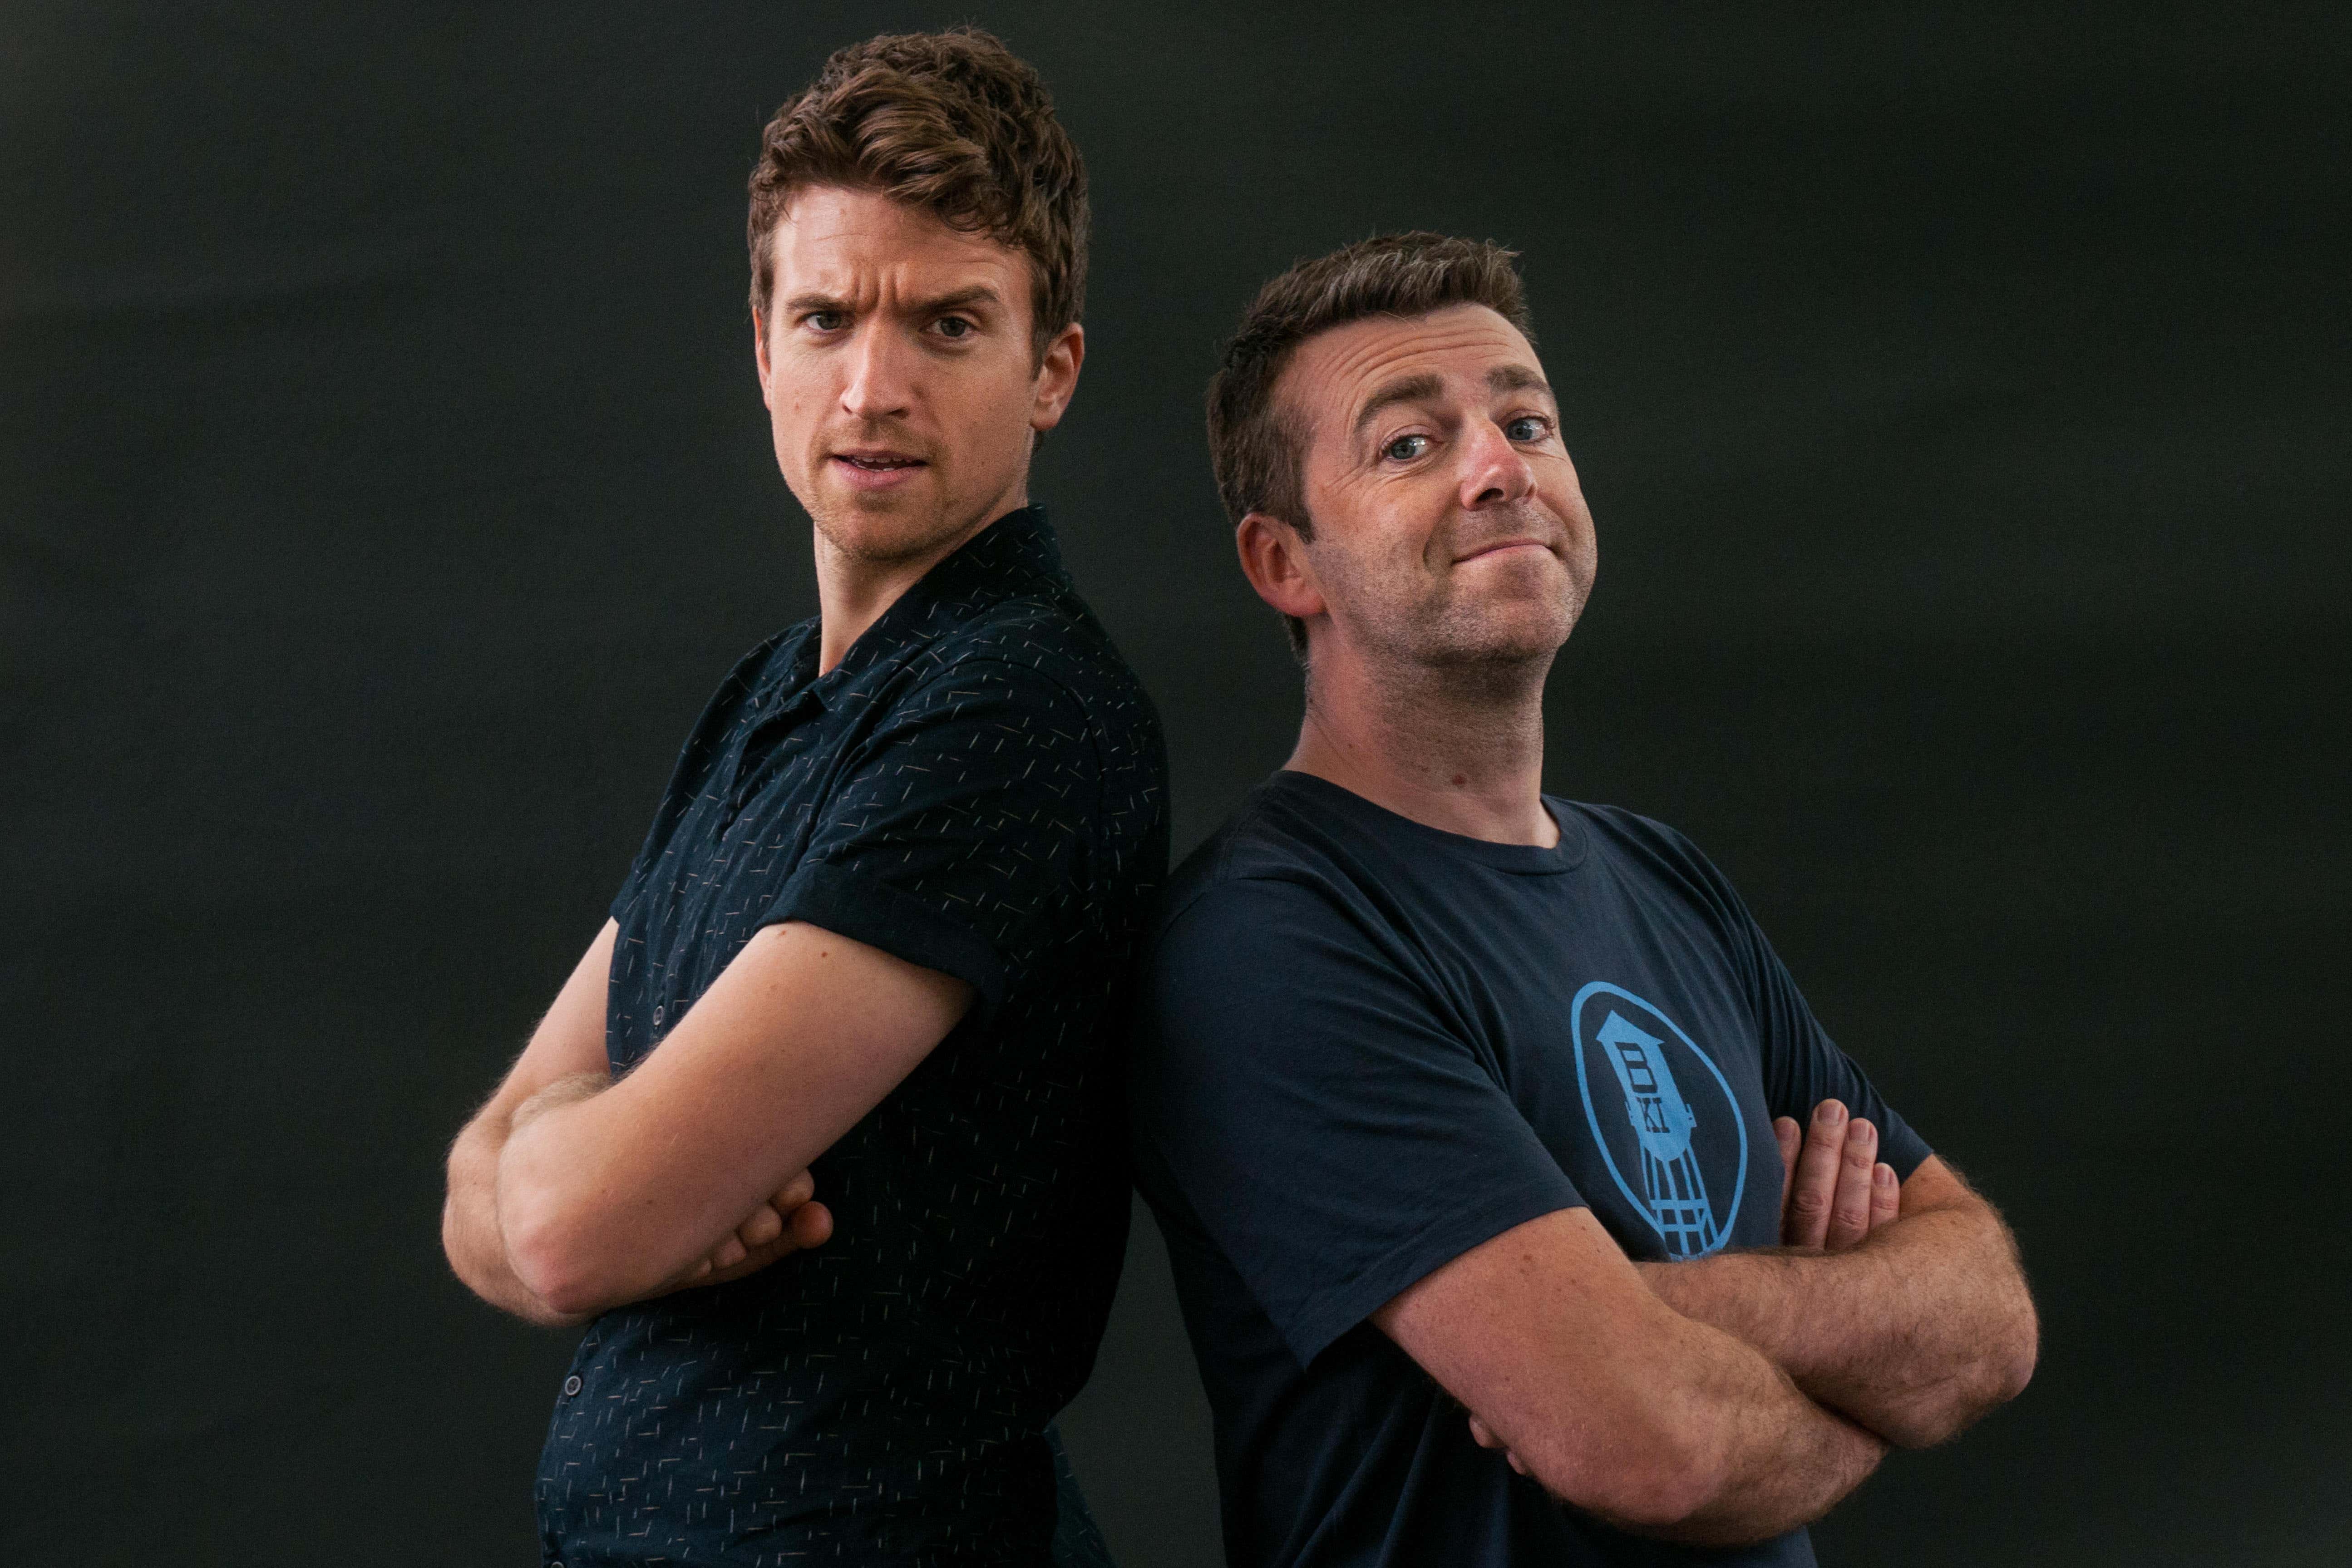 Greg James and Chris Smith have teamed up to write ‘The Twits Next Door’, an adaptation of the Roald Dahl classic novel ‘The Twits’